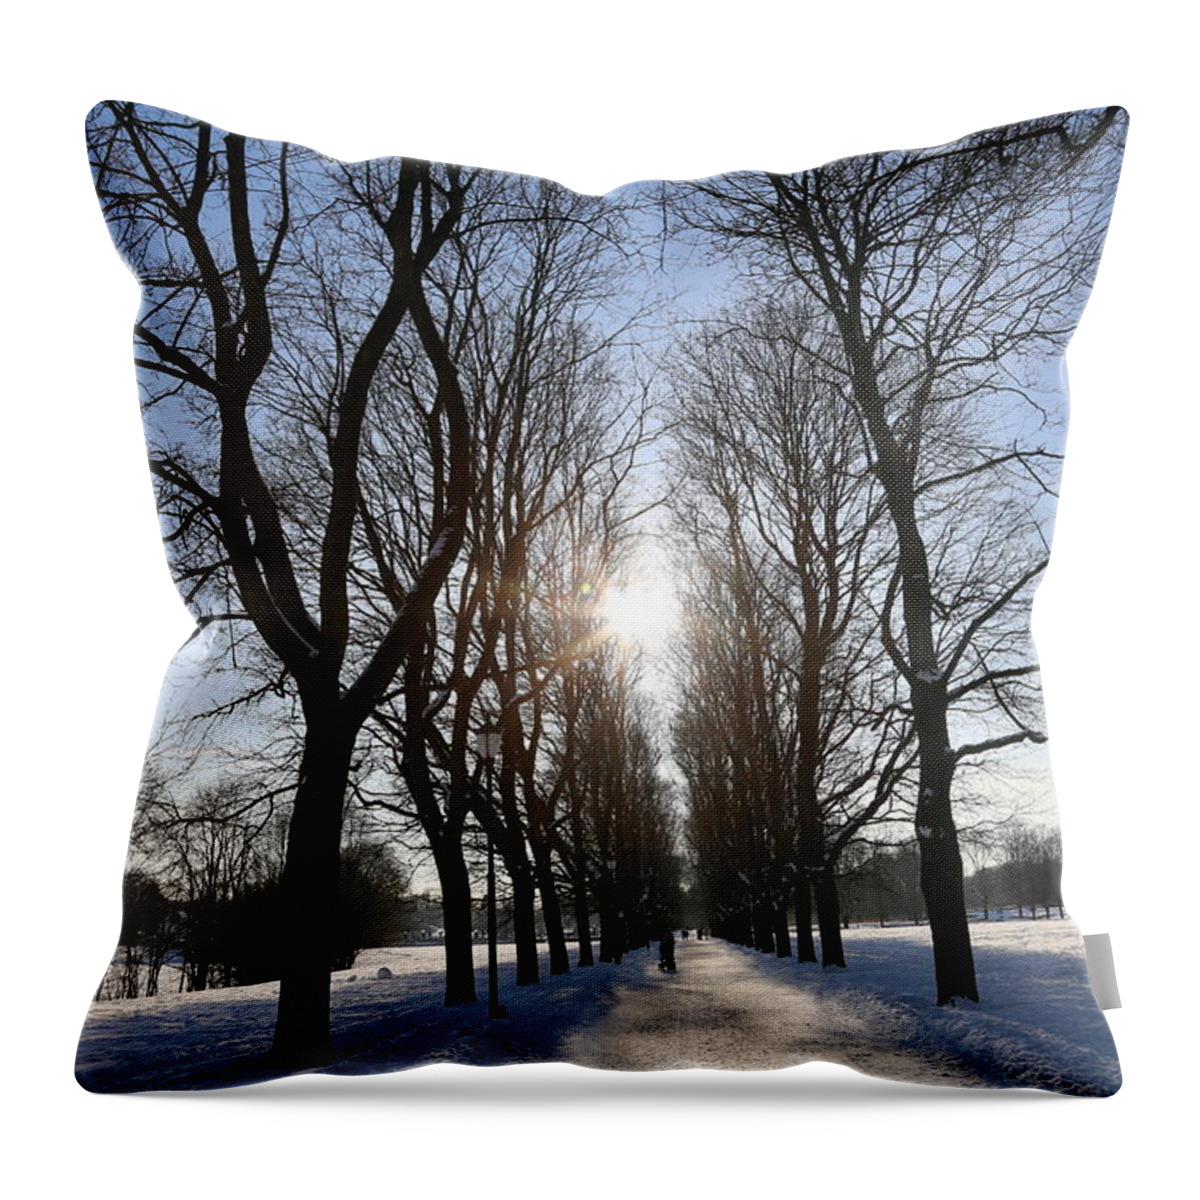 Trees Park Snow Winter Blue Sky Landscape Photo Oslo Norway Scandinavia Europe Outdoors People Throw Pillow featuring the digital art A Sunny Day by Jeanette Rode Dybdahl